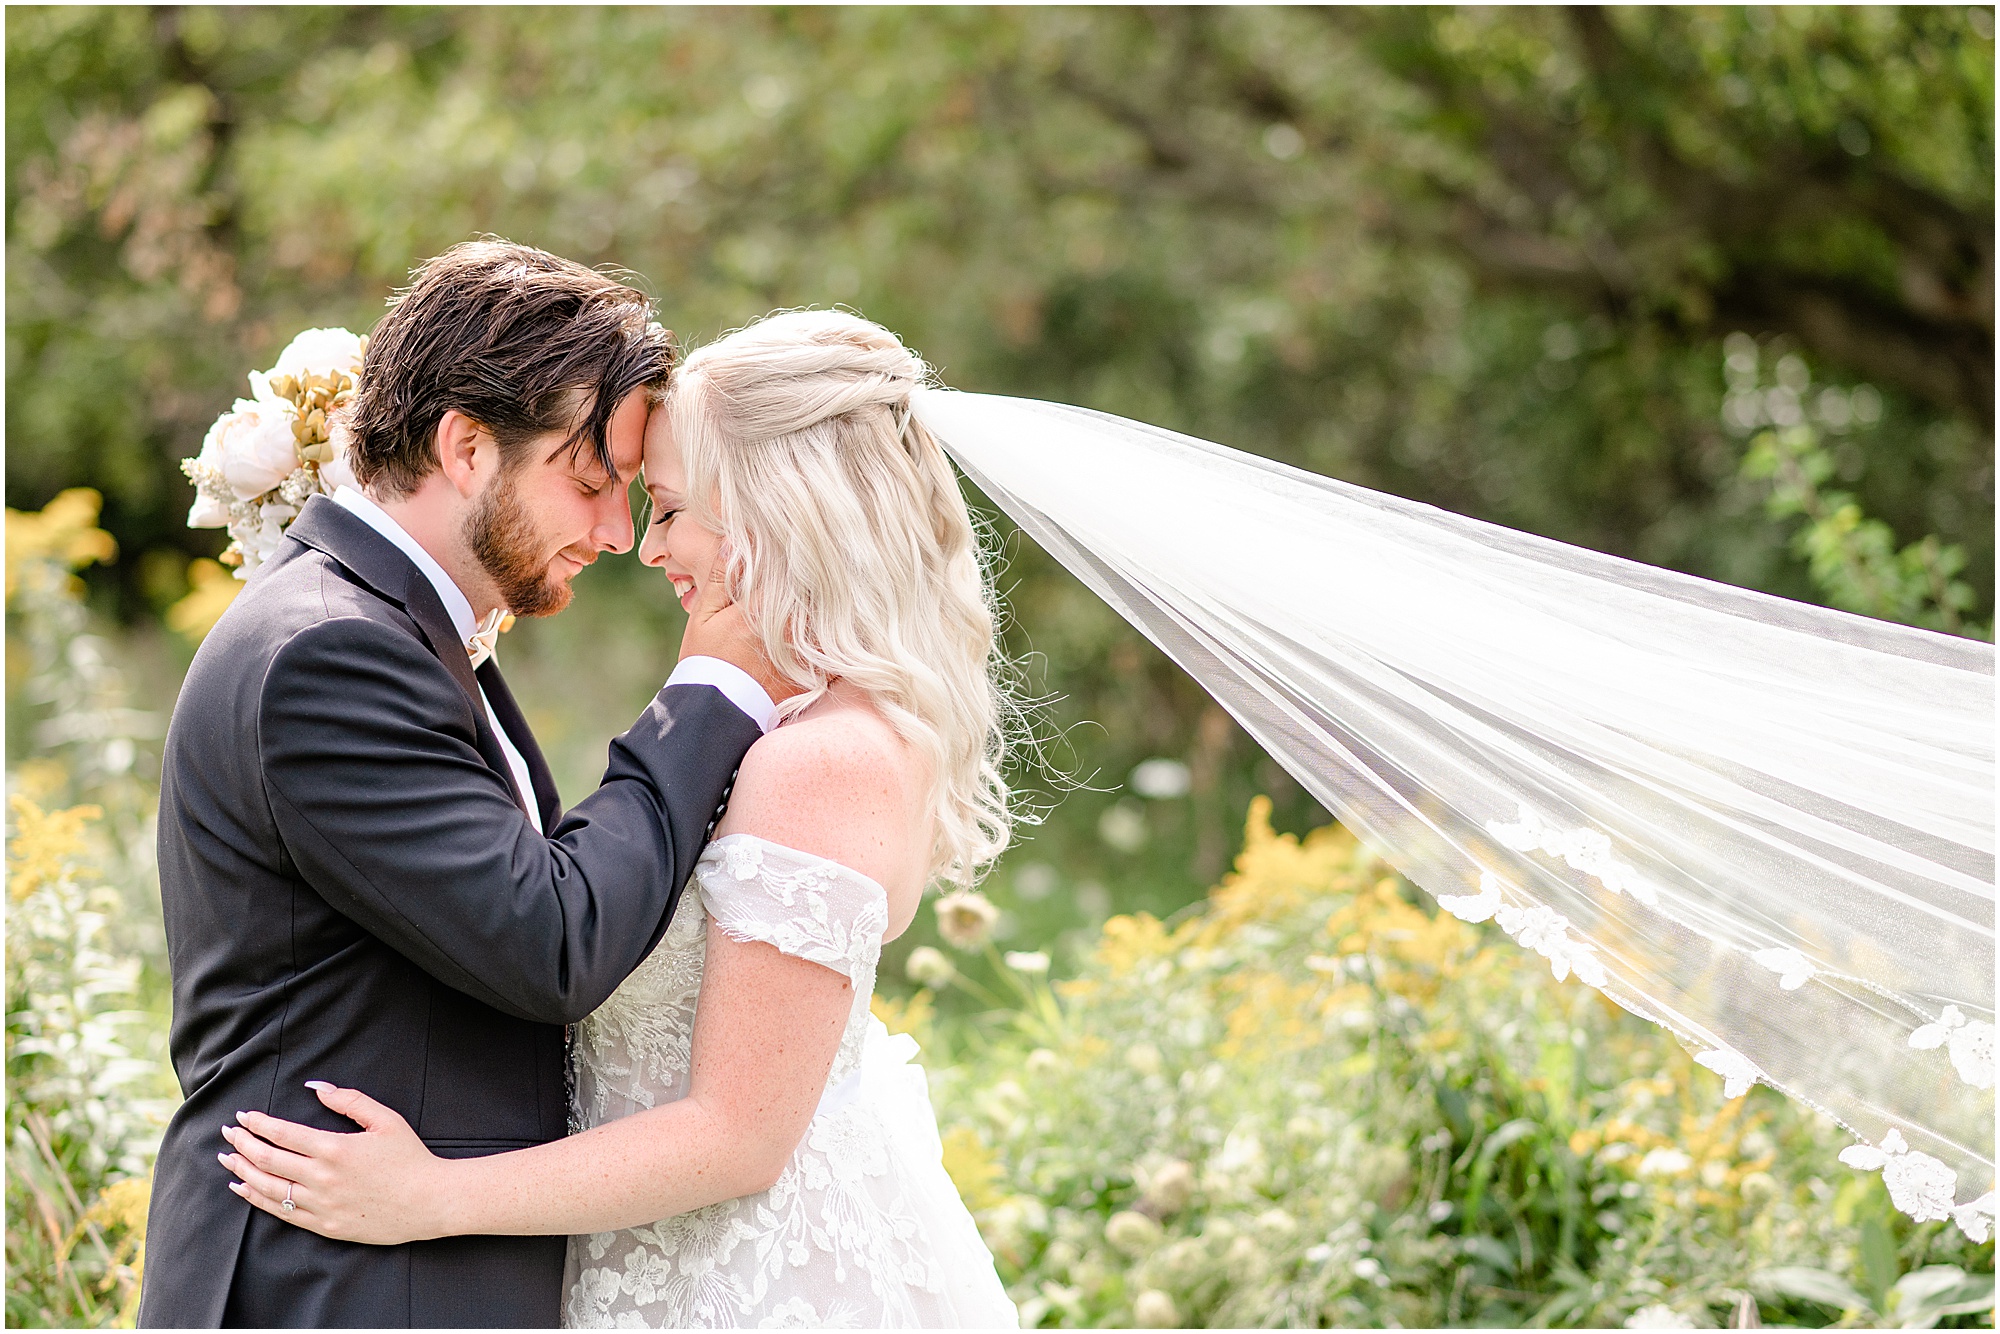 Paige and Aaron at their Creekside Acres Wedding